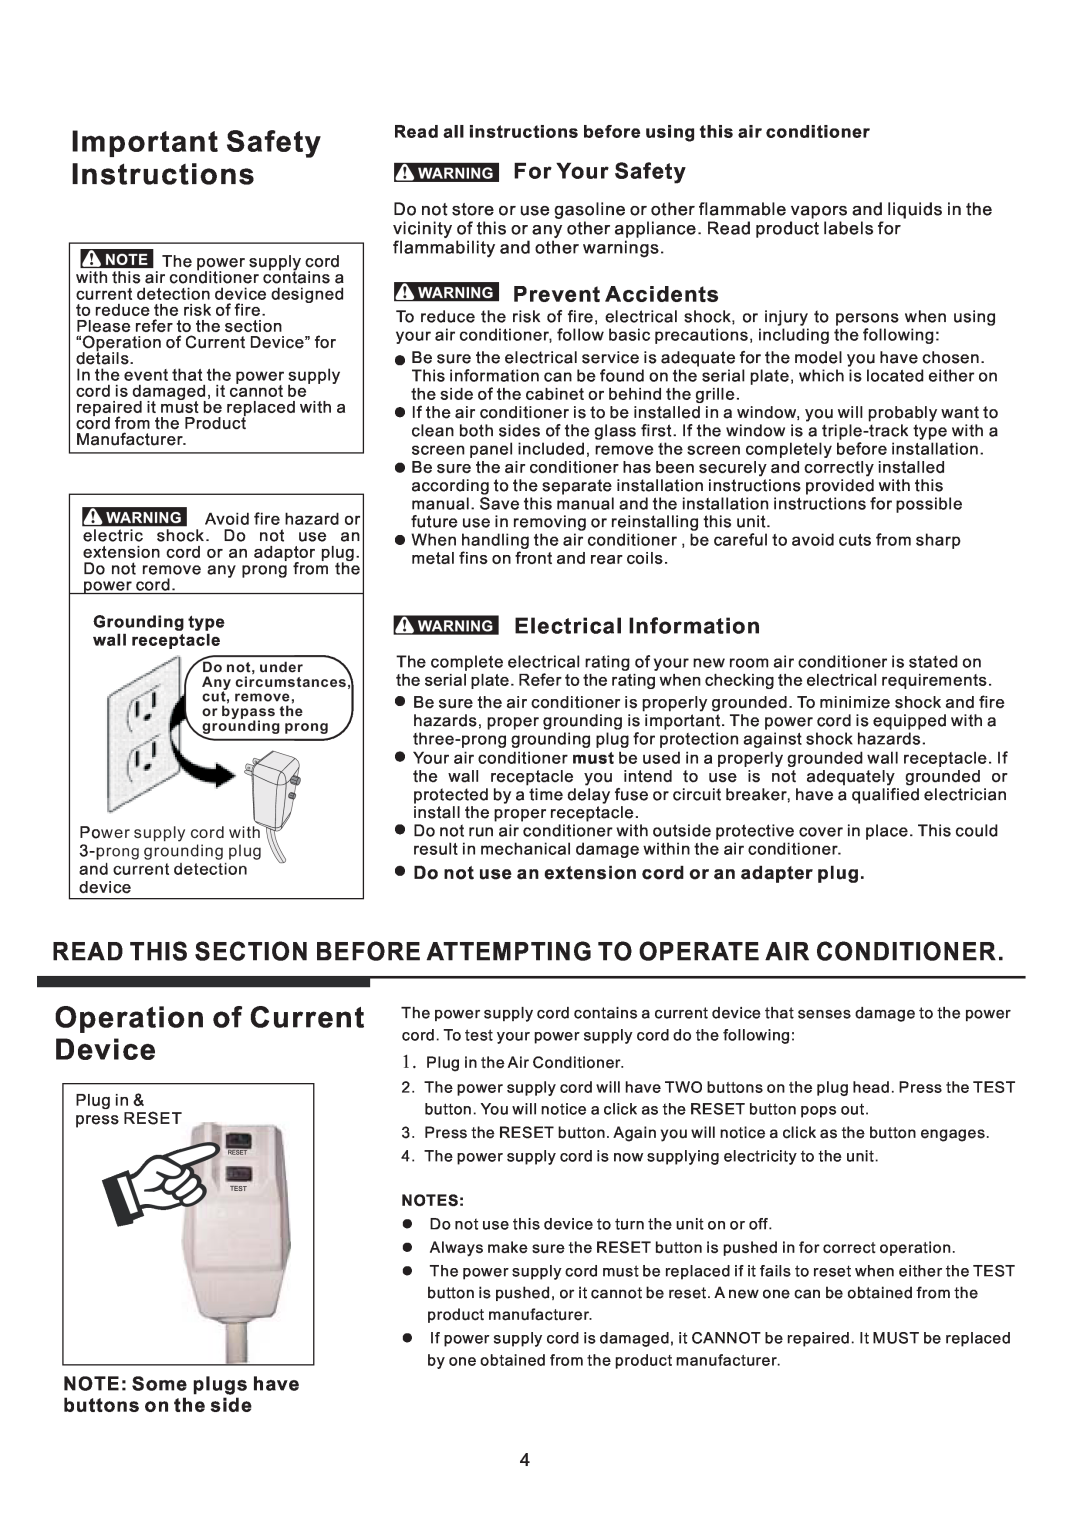 Frigidaire HEAVY DUTY AIR CONDITIONER manual Important Safety Instructions, Operation of Current Device, For Your Safety 